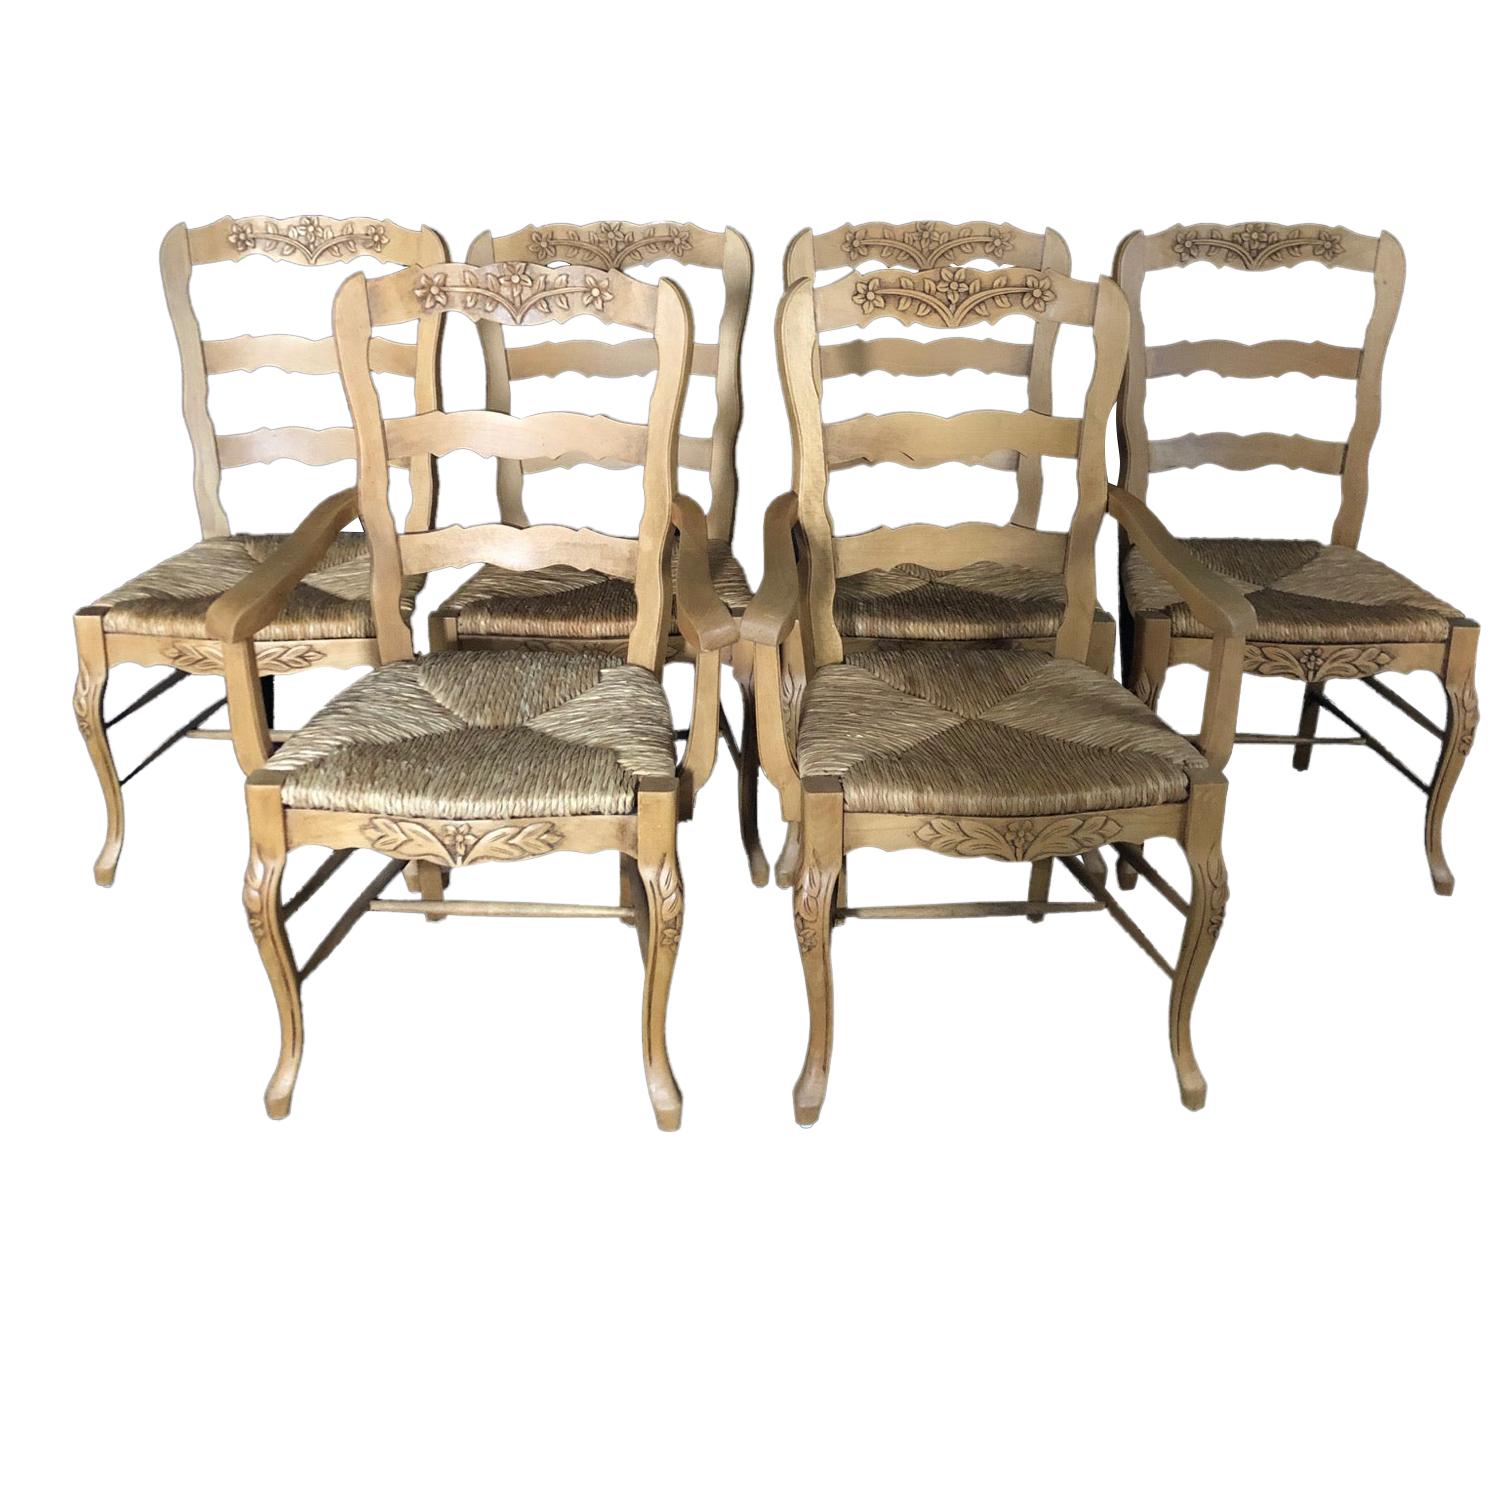 Set of Six French Provincial Carved Ladderback Dining Chairs with Rush Seats